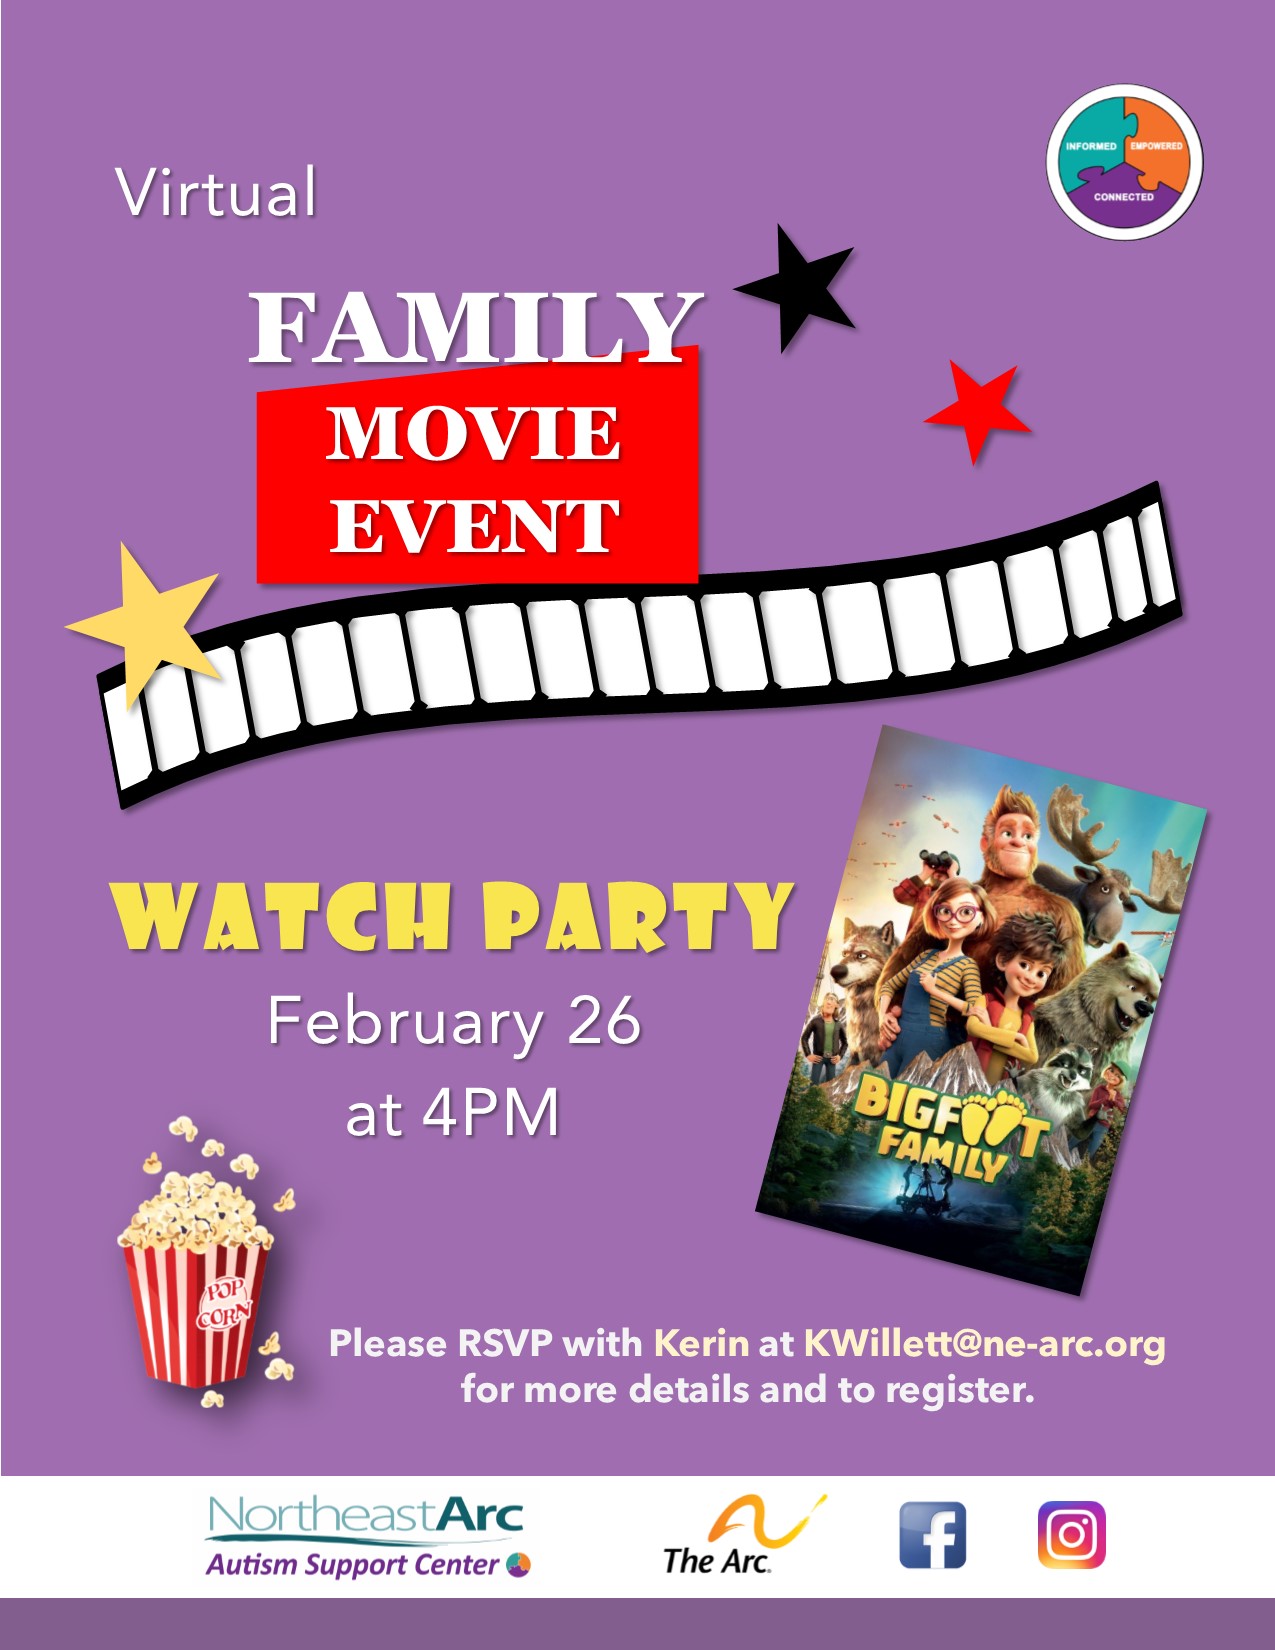 Flyer for Autism Support Center Virtual Family Movie Event Watch Party, featuring the movie BIGFOOT FAMILY on February 26 at 4PM. RSVP Kerin at KWillettT@ne-arc.org for more details and to register.